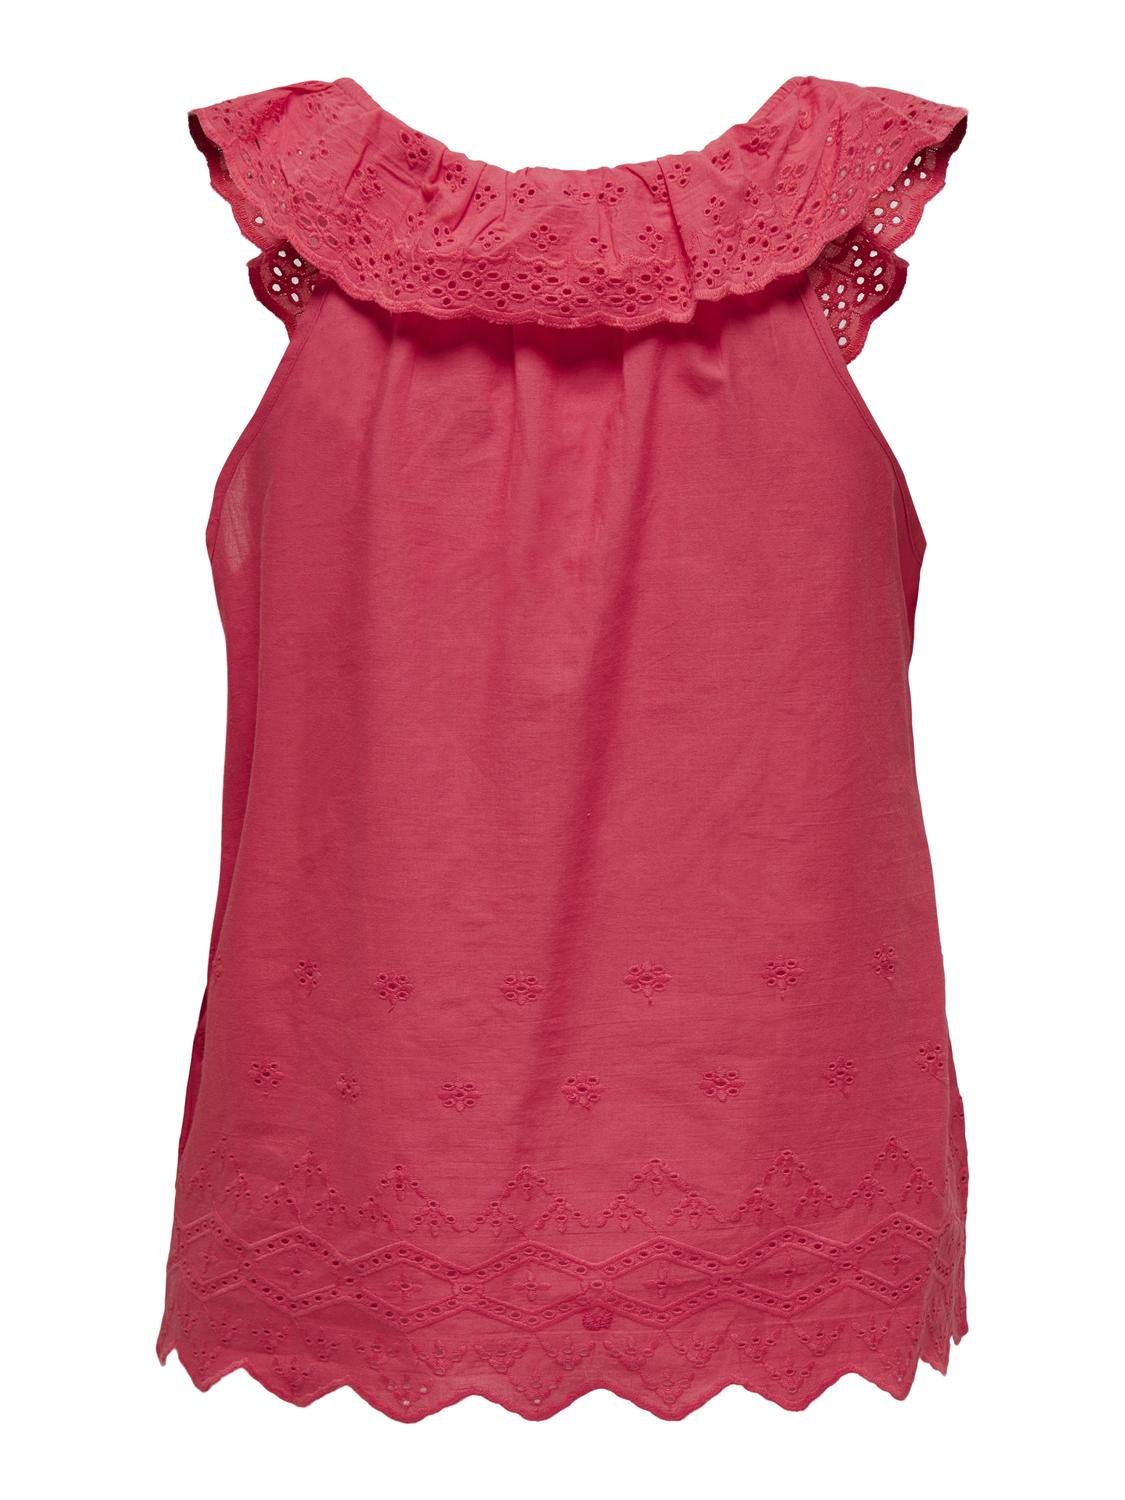 ONLY Detailed sleeveless top -Teaberry - 15312387